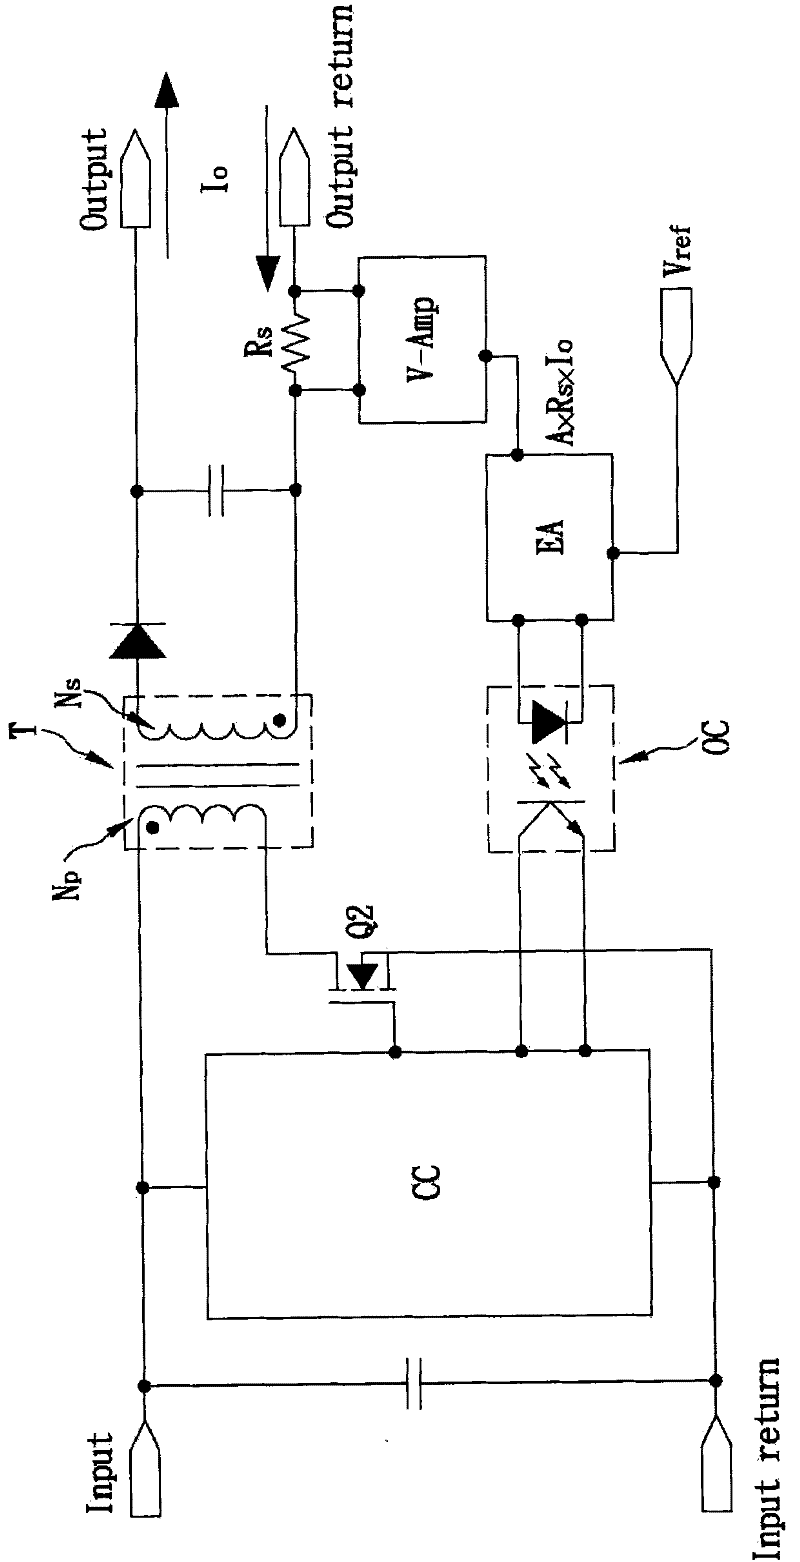 Constant-current circuit with characteristics of voltage compensation and zero potential switching